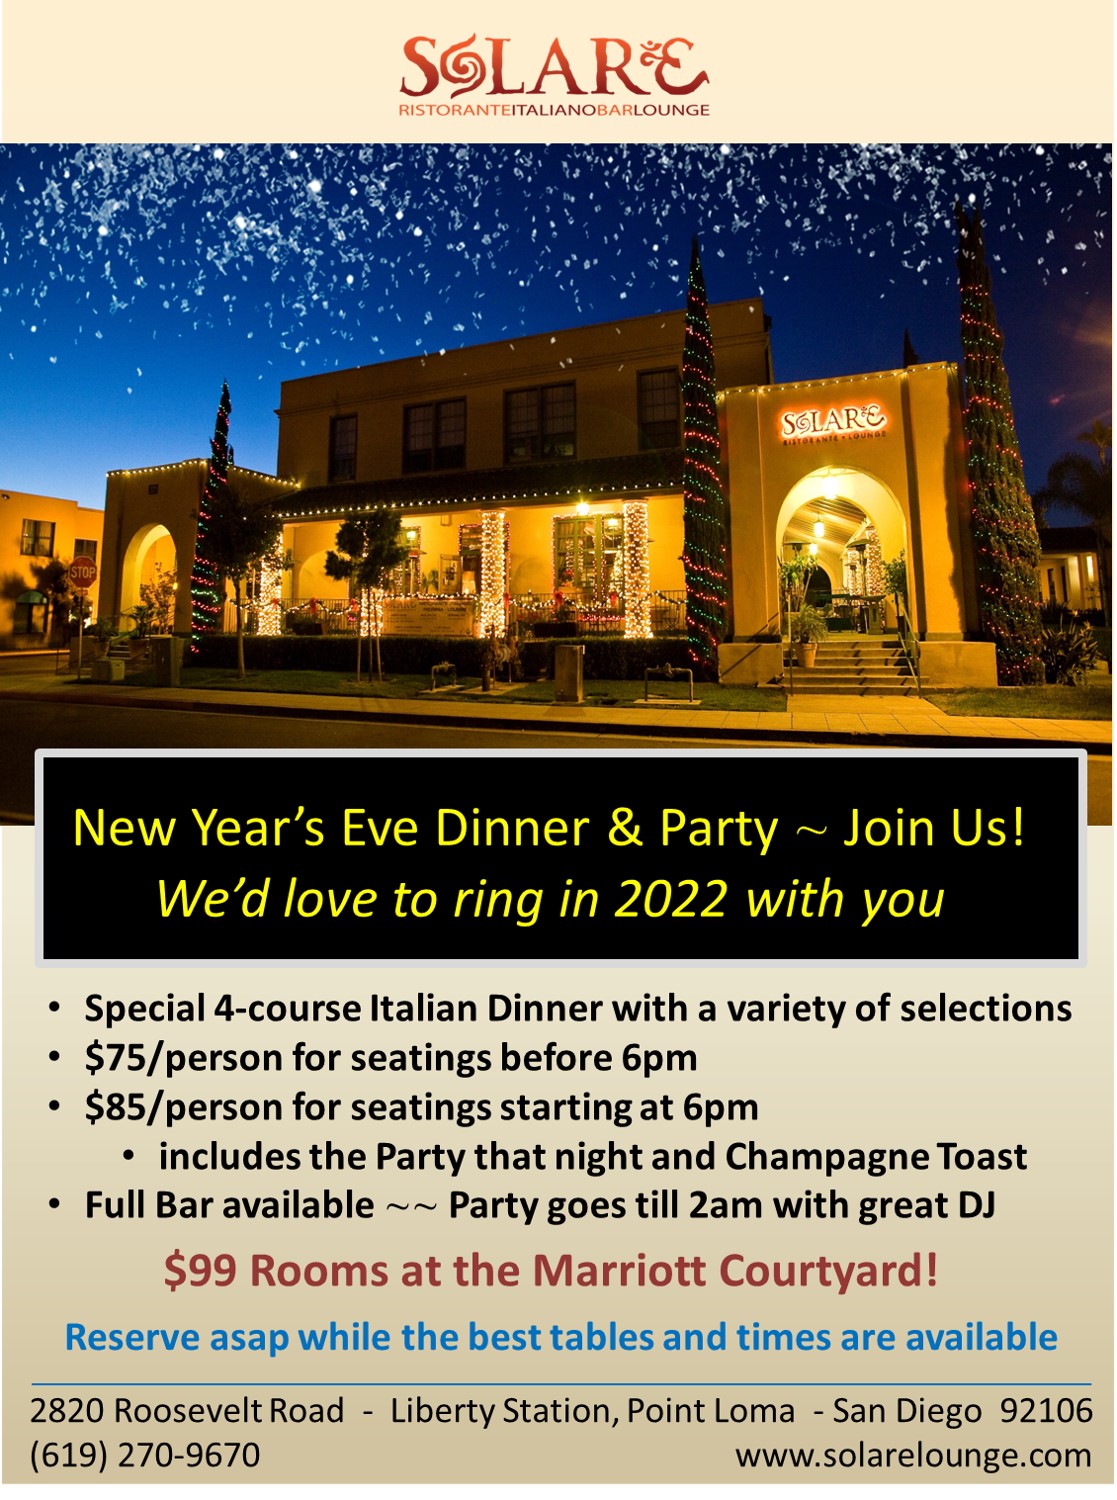 <a id="Solare-NYE-Dinner-Party"></a>Solare New Year's Eve Dinner & Party!